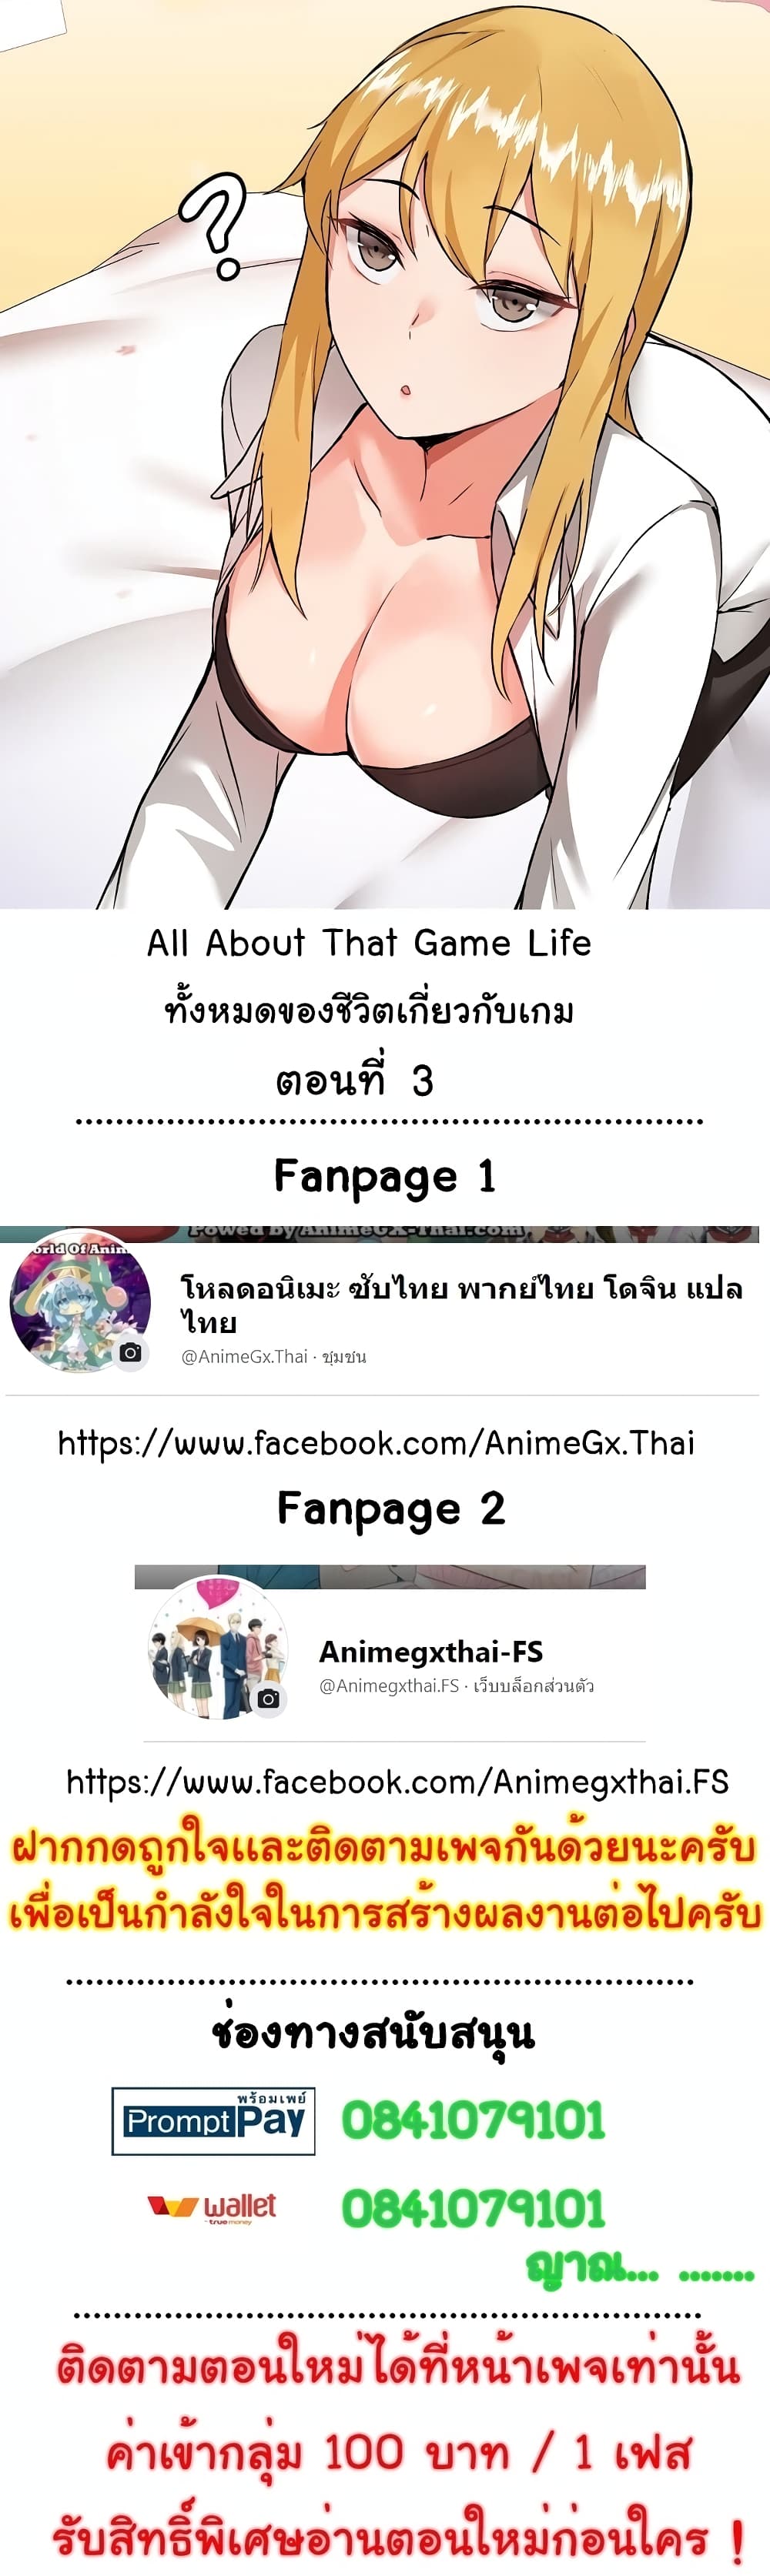 All About That Game Life - หน้า 1